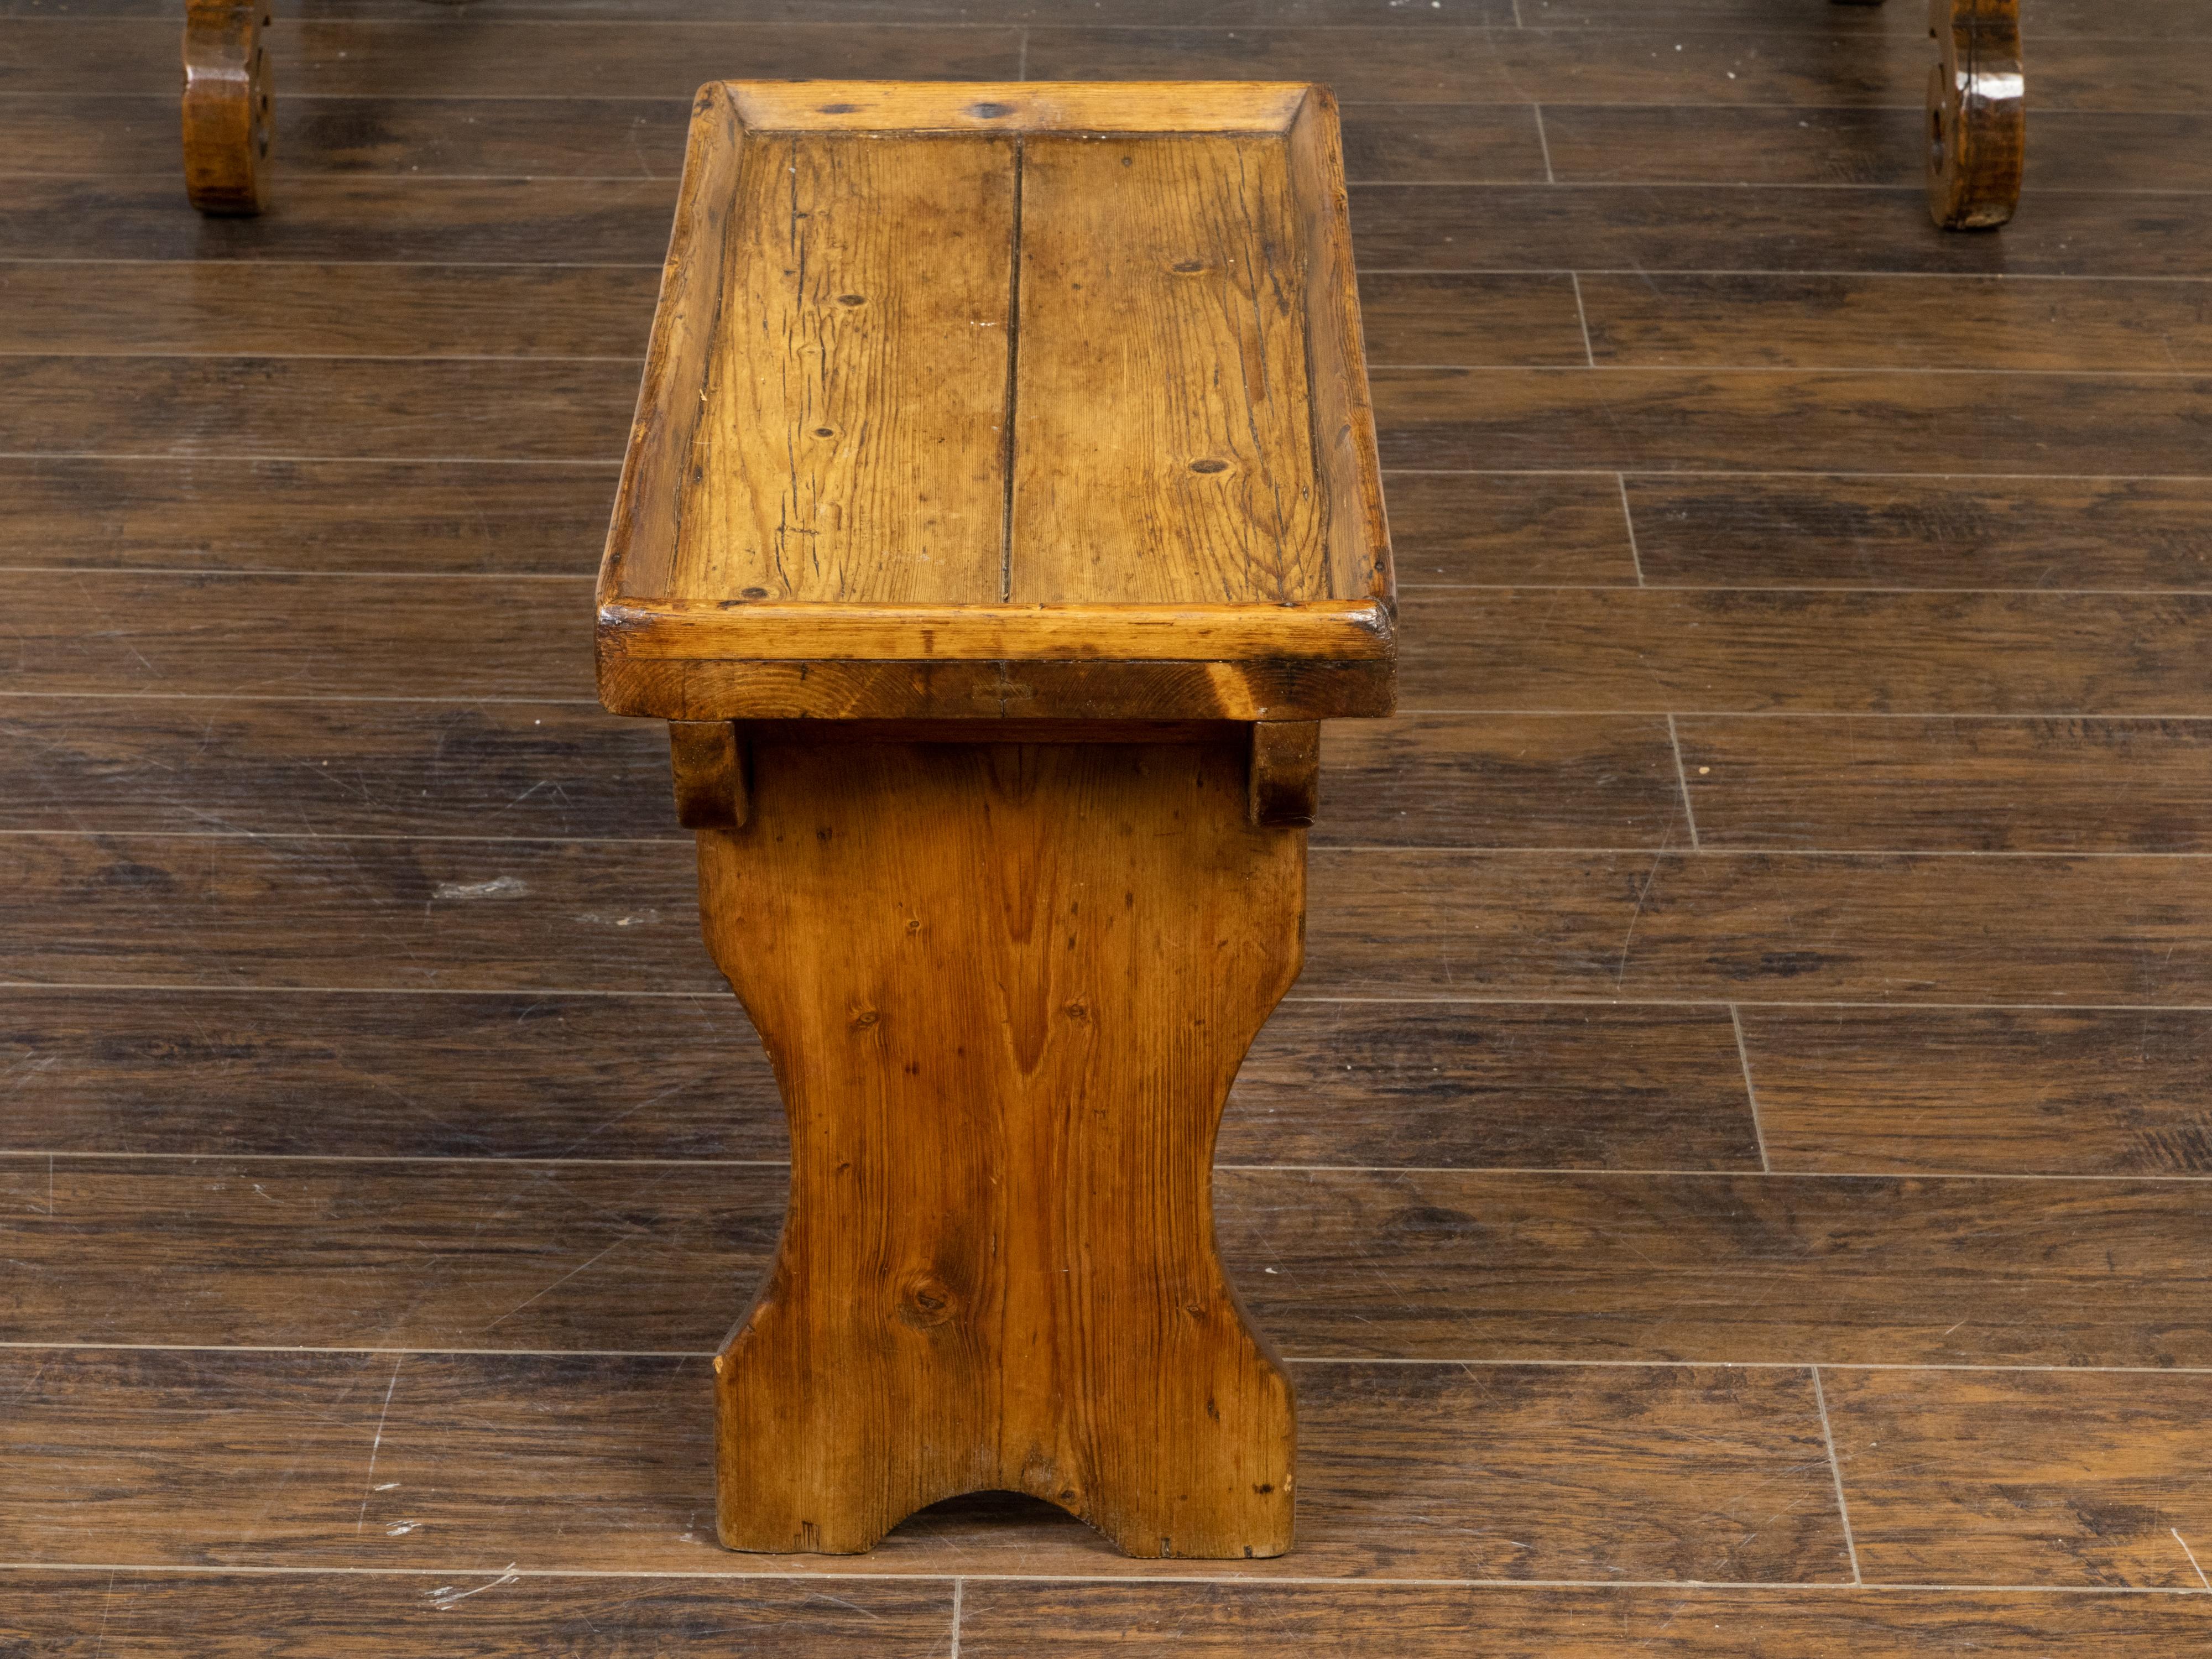 English Turn of the Century Pine Drinks Table with Tray Top and Carved Legs 1